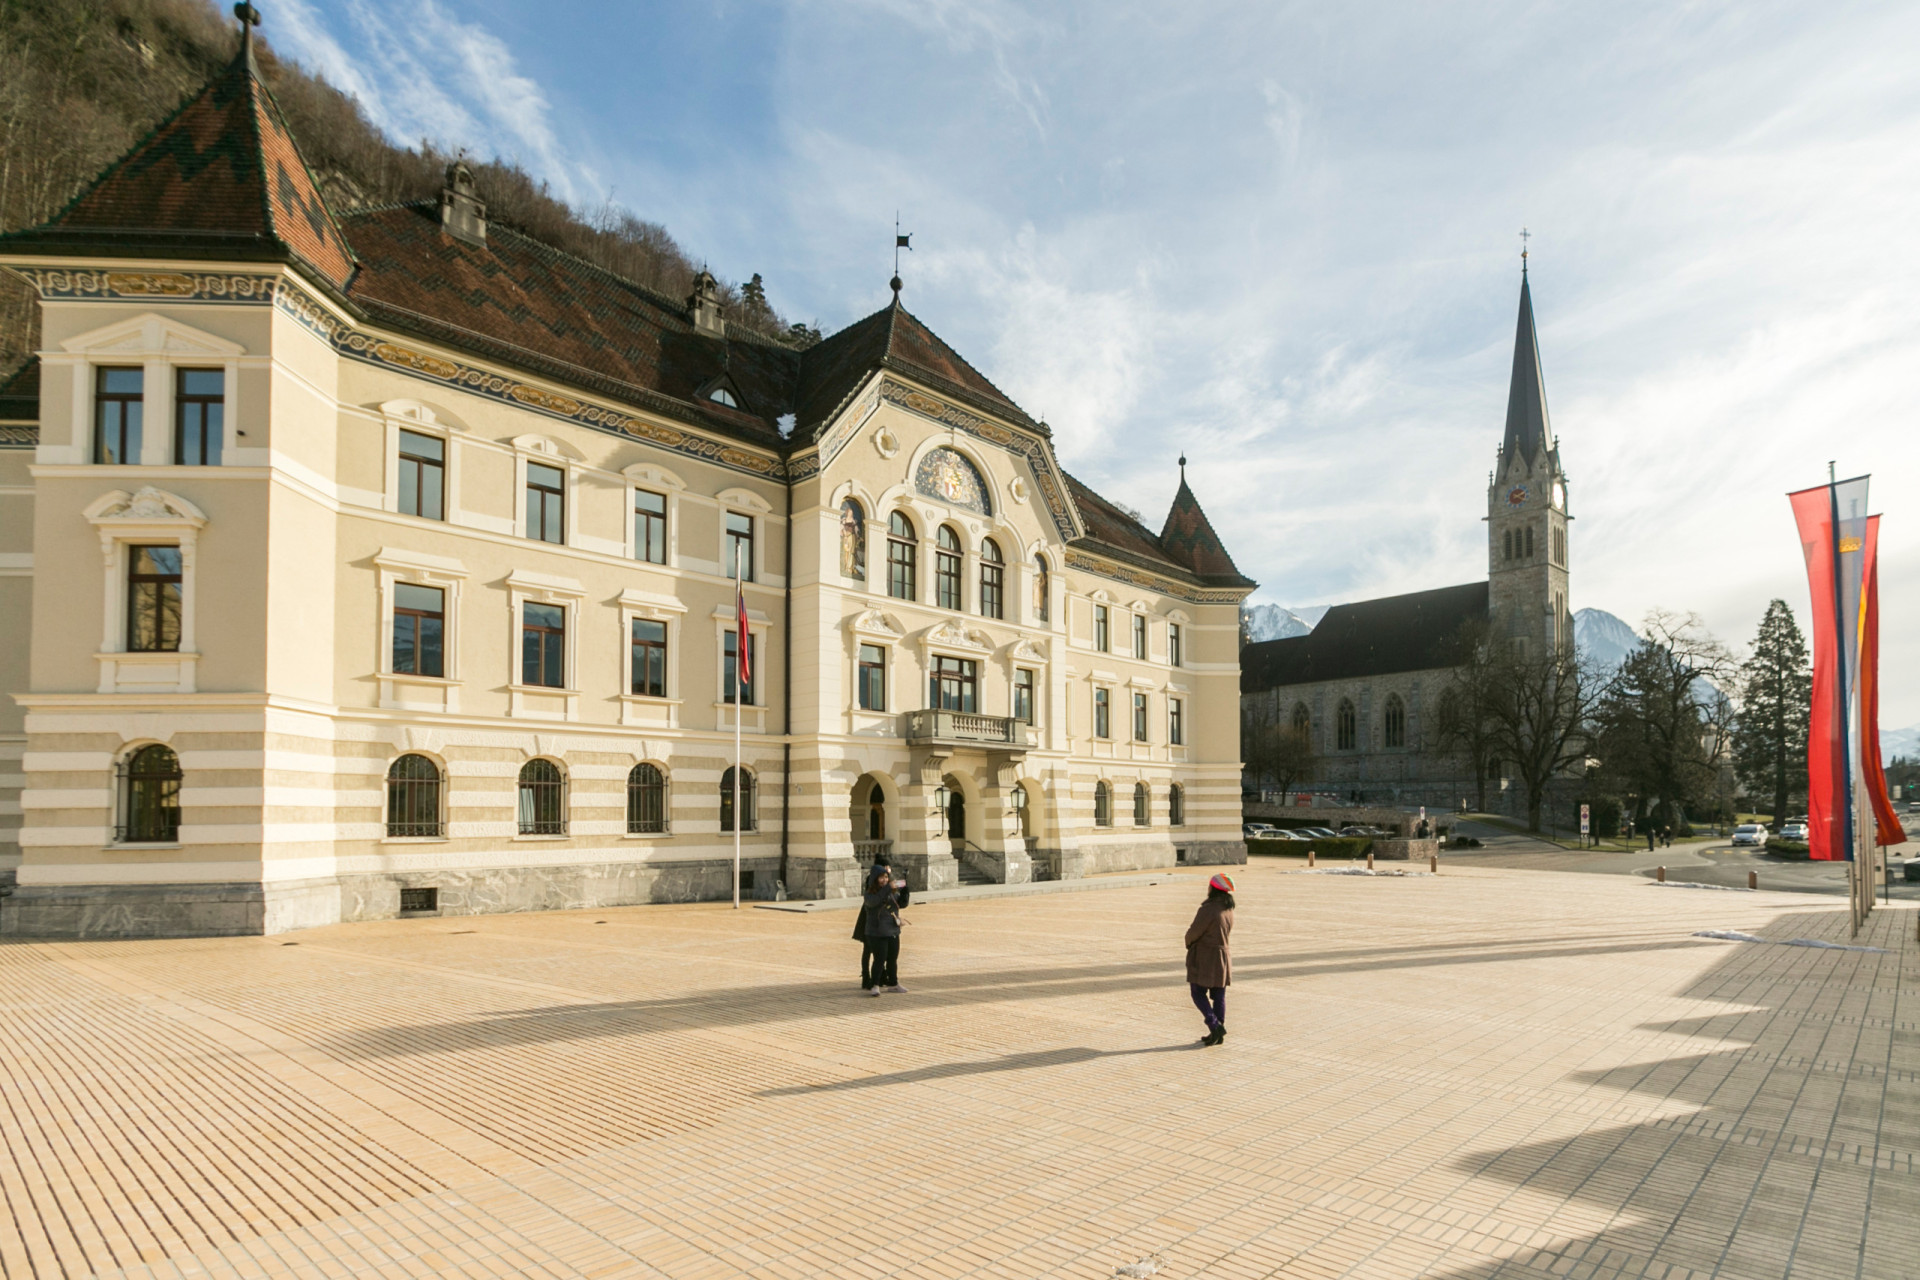 <p>After driving for half an hour, you will find yourself in Ruggell, a beautiful municipality nestled snugly between the Austrian and Swiss borders.</p><p>You may also like:<a href="https://www.starsinsider.com/n/323528?utm_source=msn.com&utm_medium=display&utm_campaign=referral_description&utm_content=701330en-us"> Films that inspired real-life crimes</a></p>